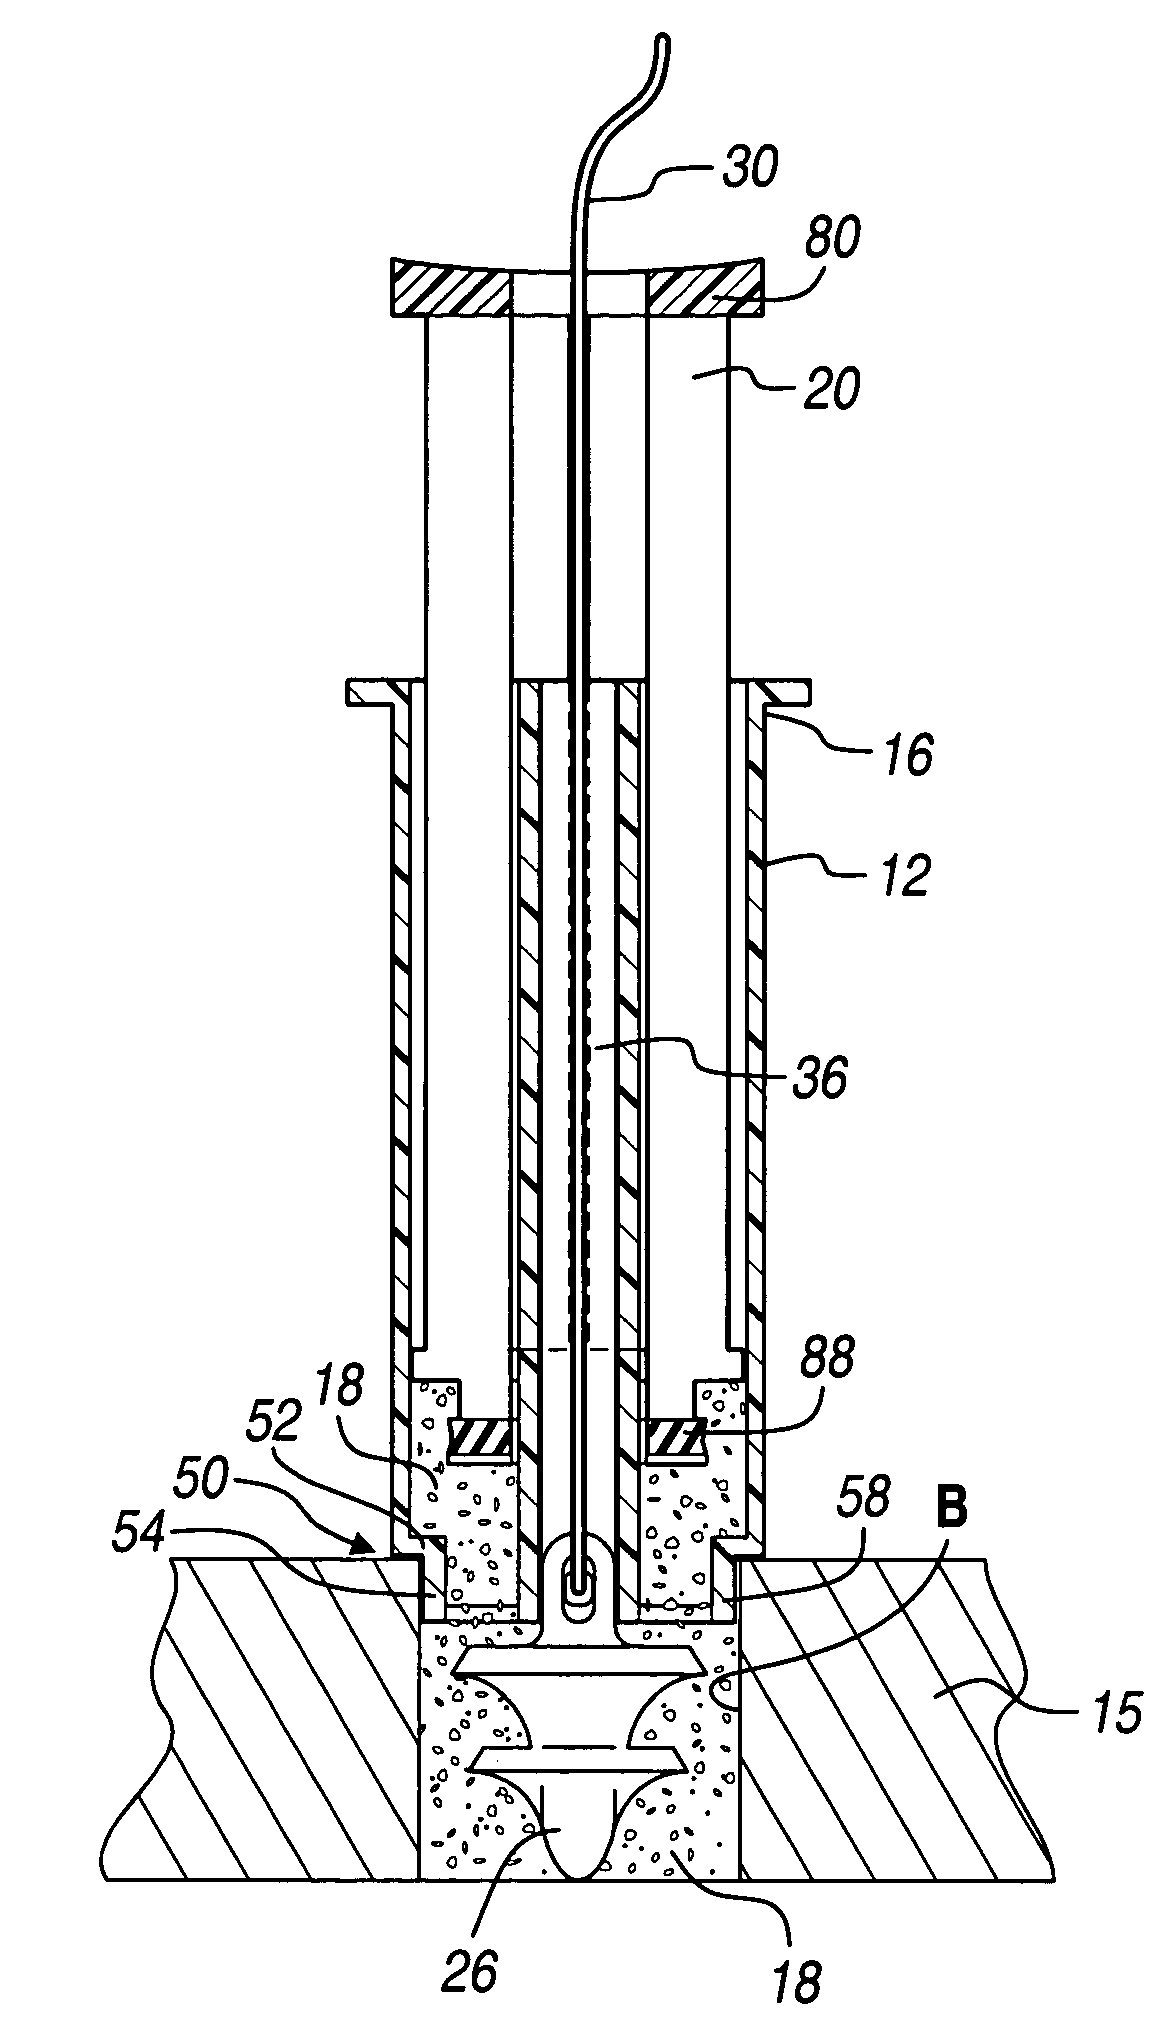 Method and apparatus for implanting a suture anchor